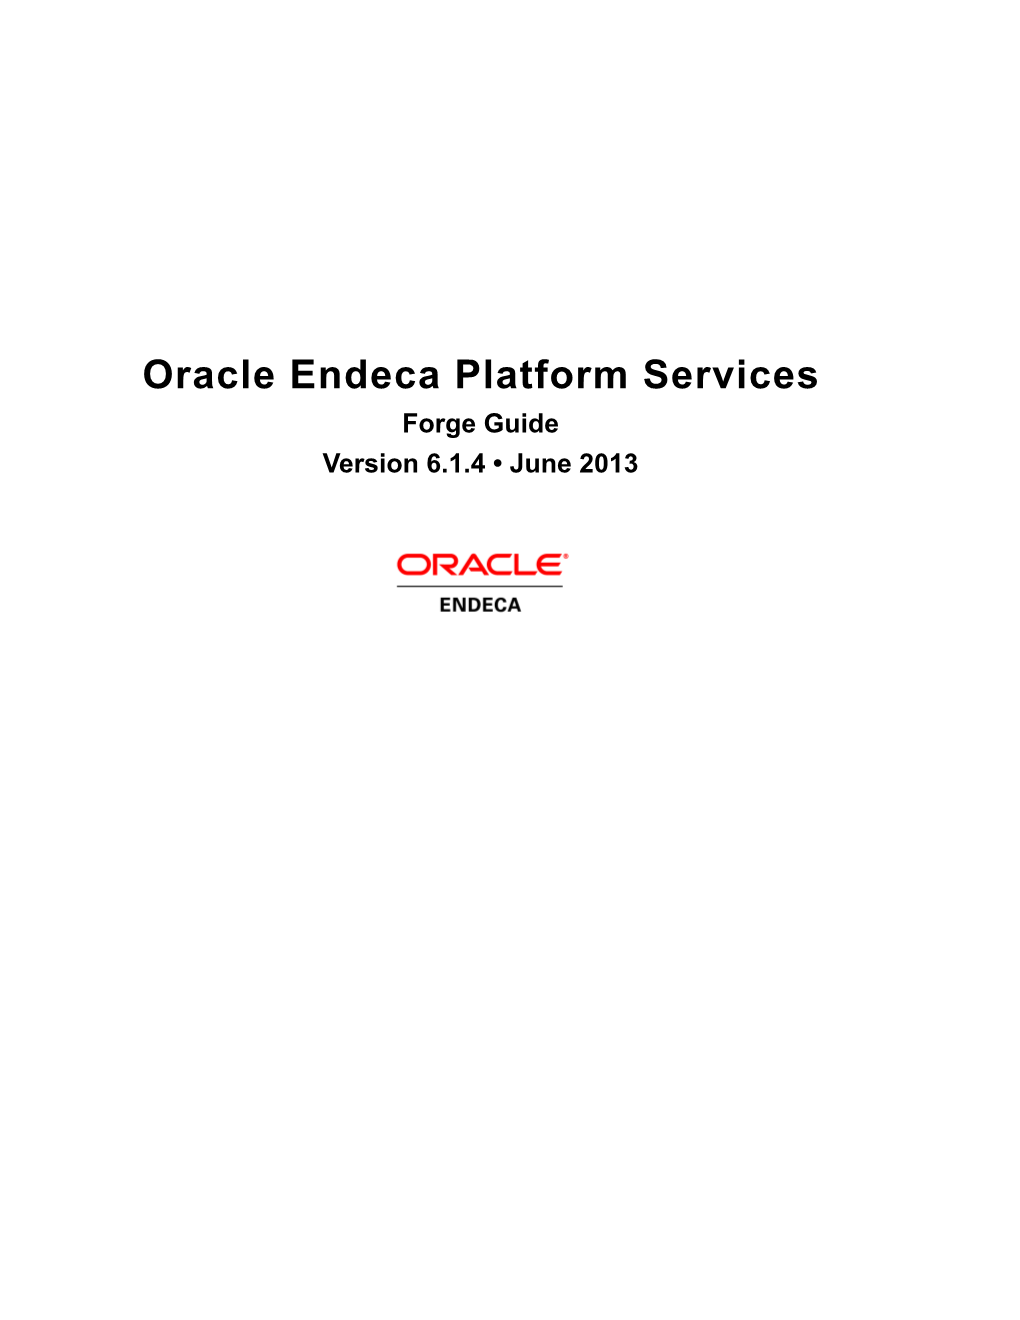 Oracle Endeca Platform Services: Forge Guide